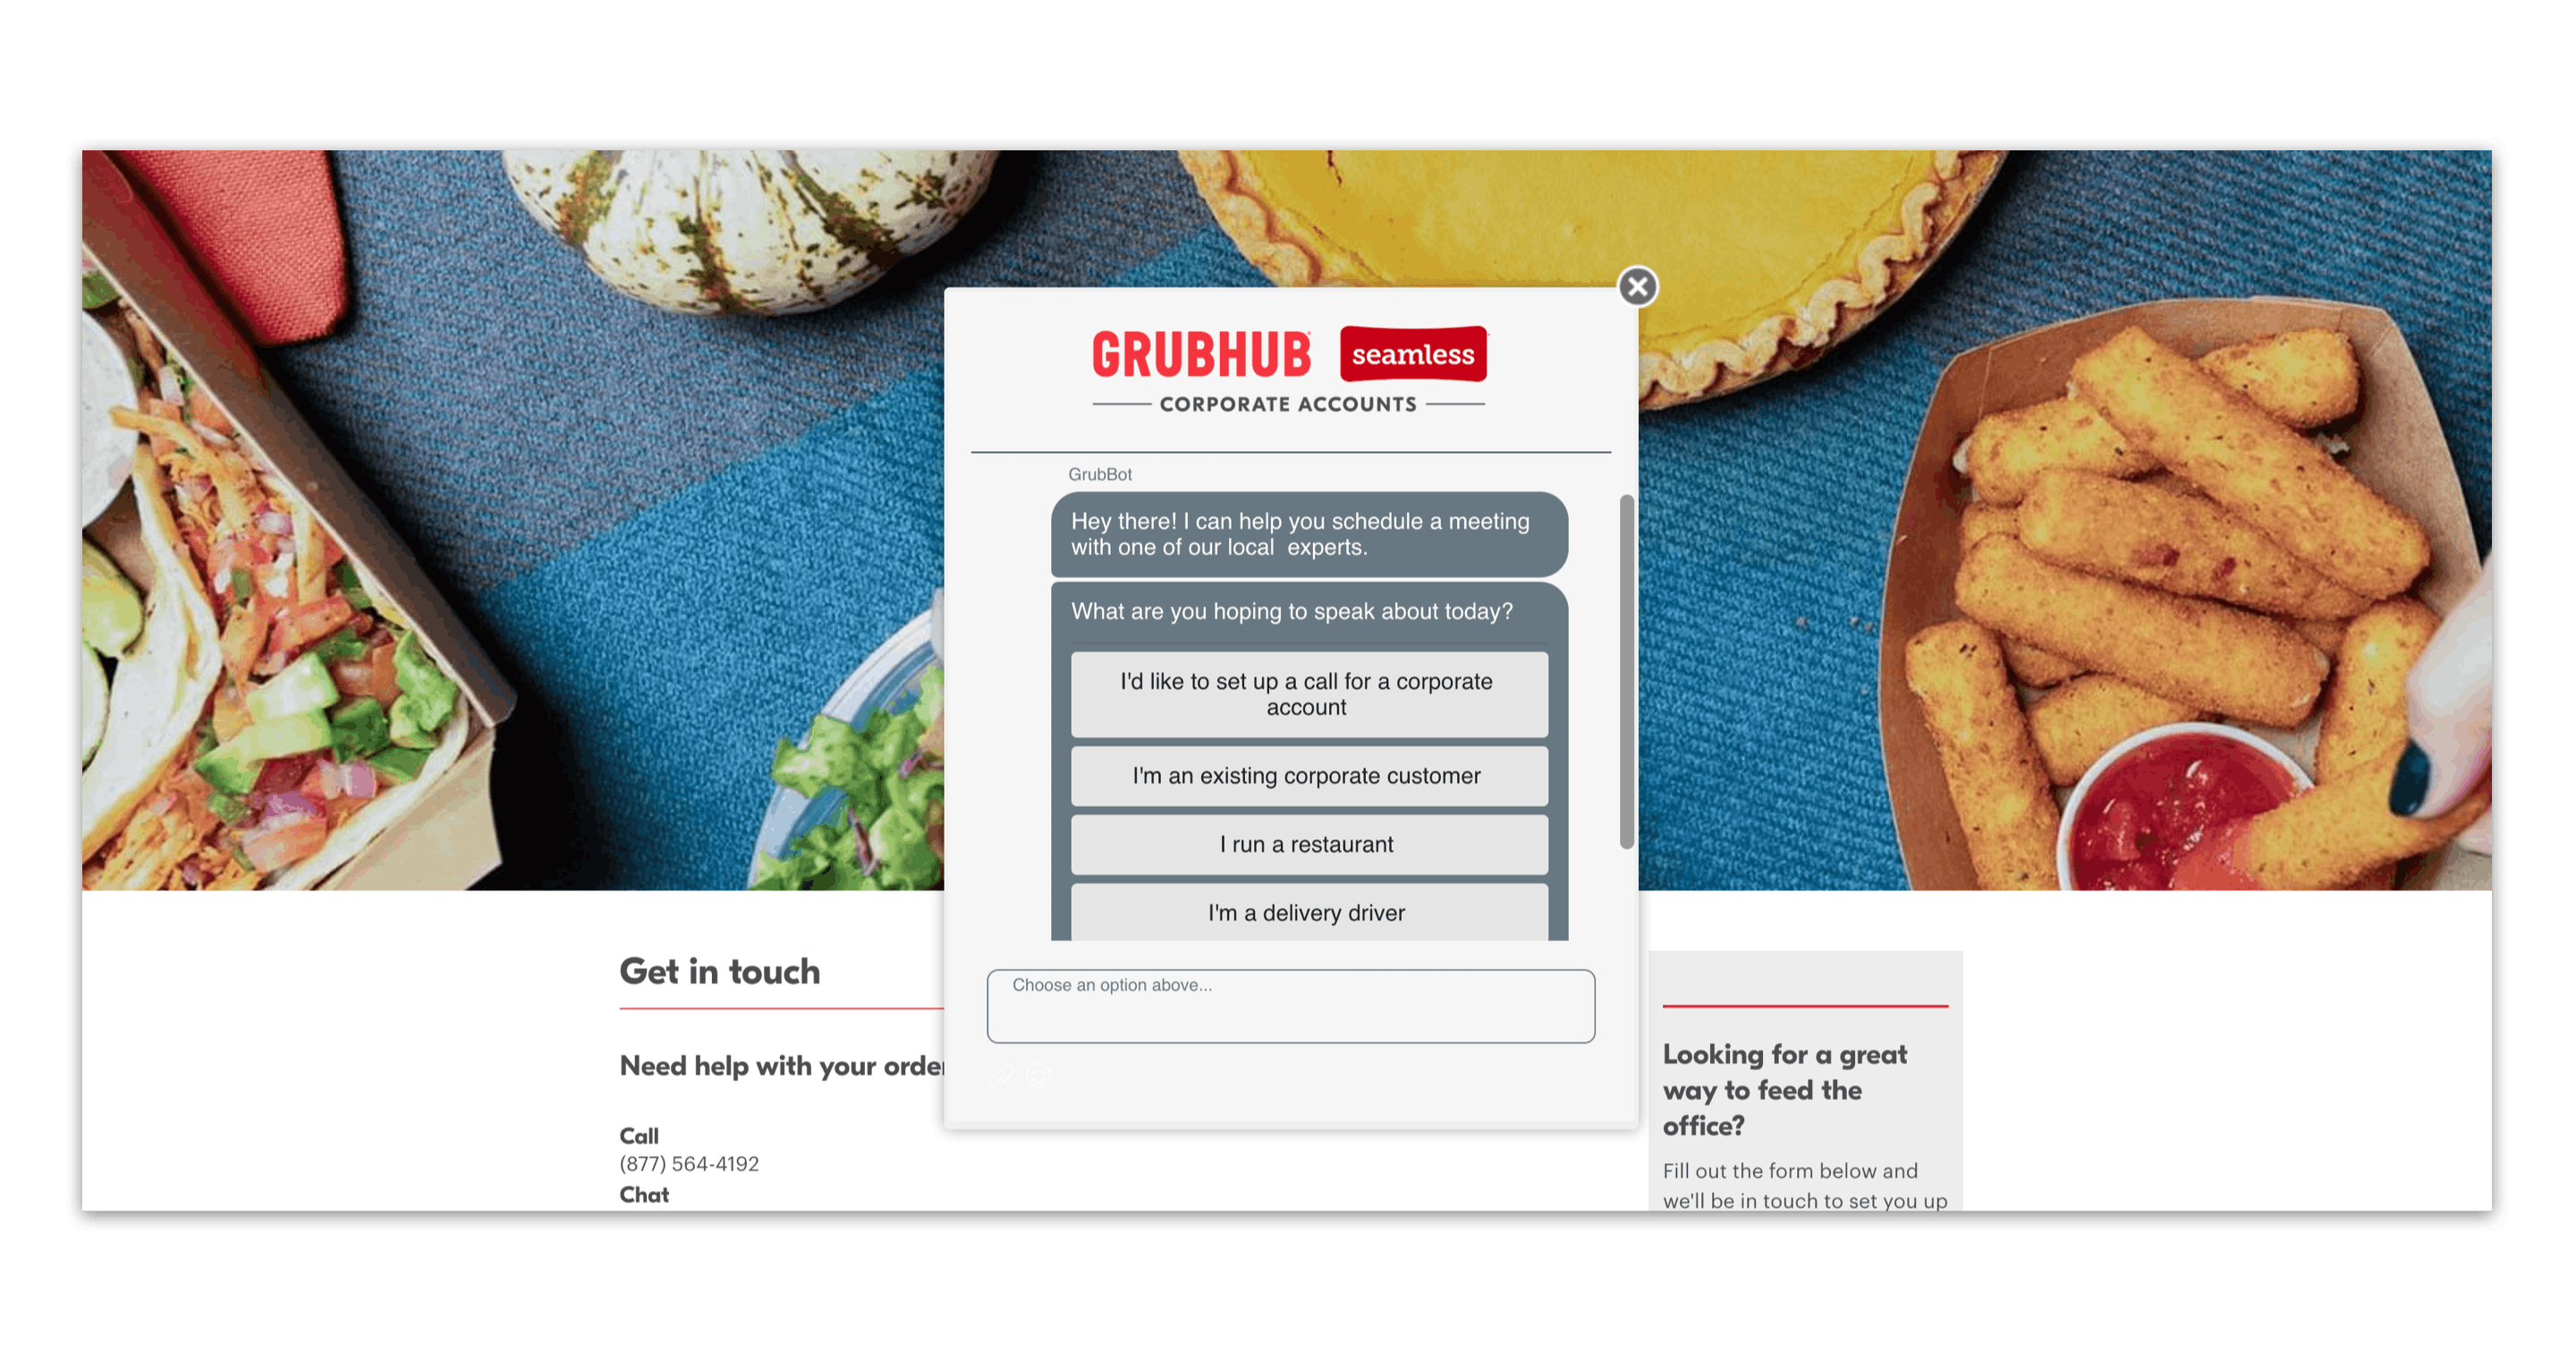 grubhub live chat window powered by drift, displaying automated messages to begin the conversation and route it to the correct department